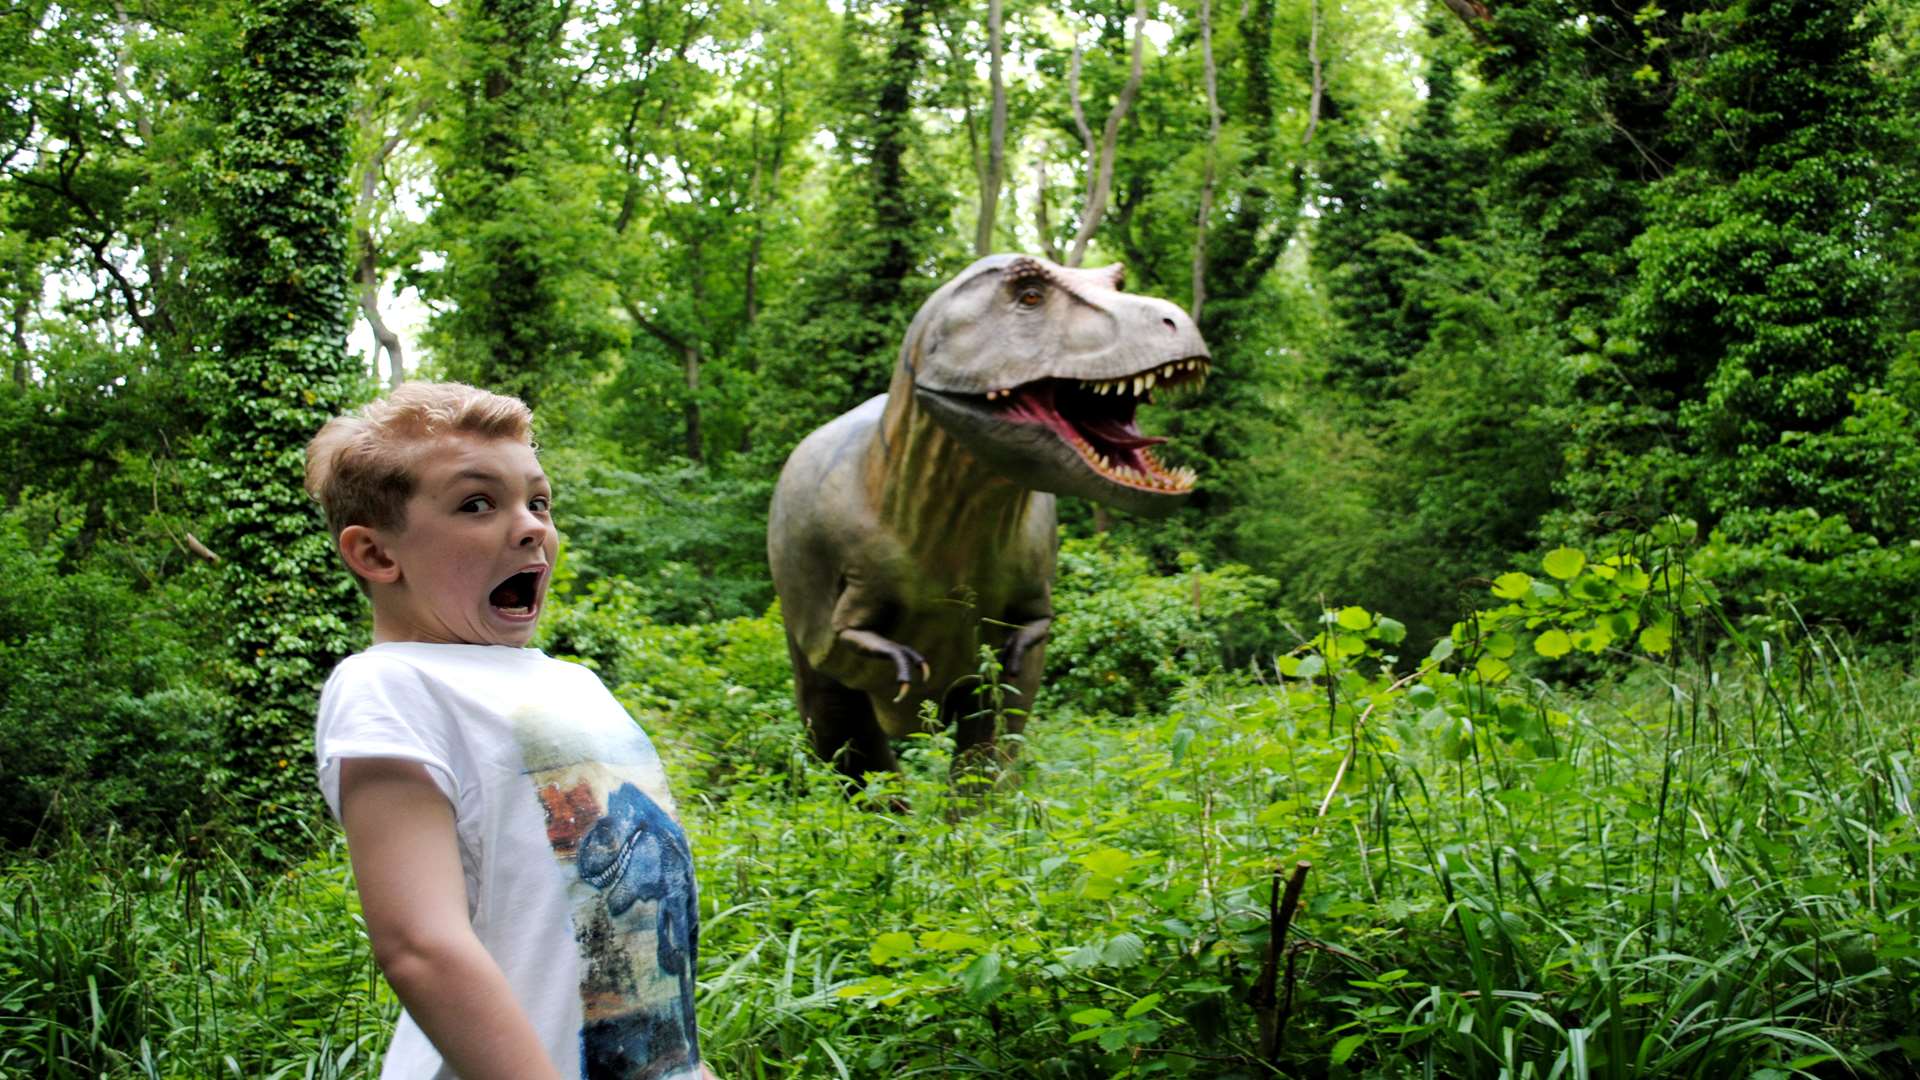 Head into the Dinosaur Forest if you dare this Easter holidays at Port Lympne Reserve